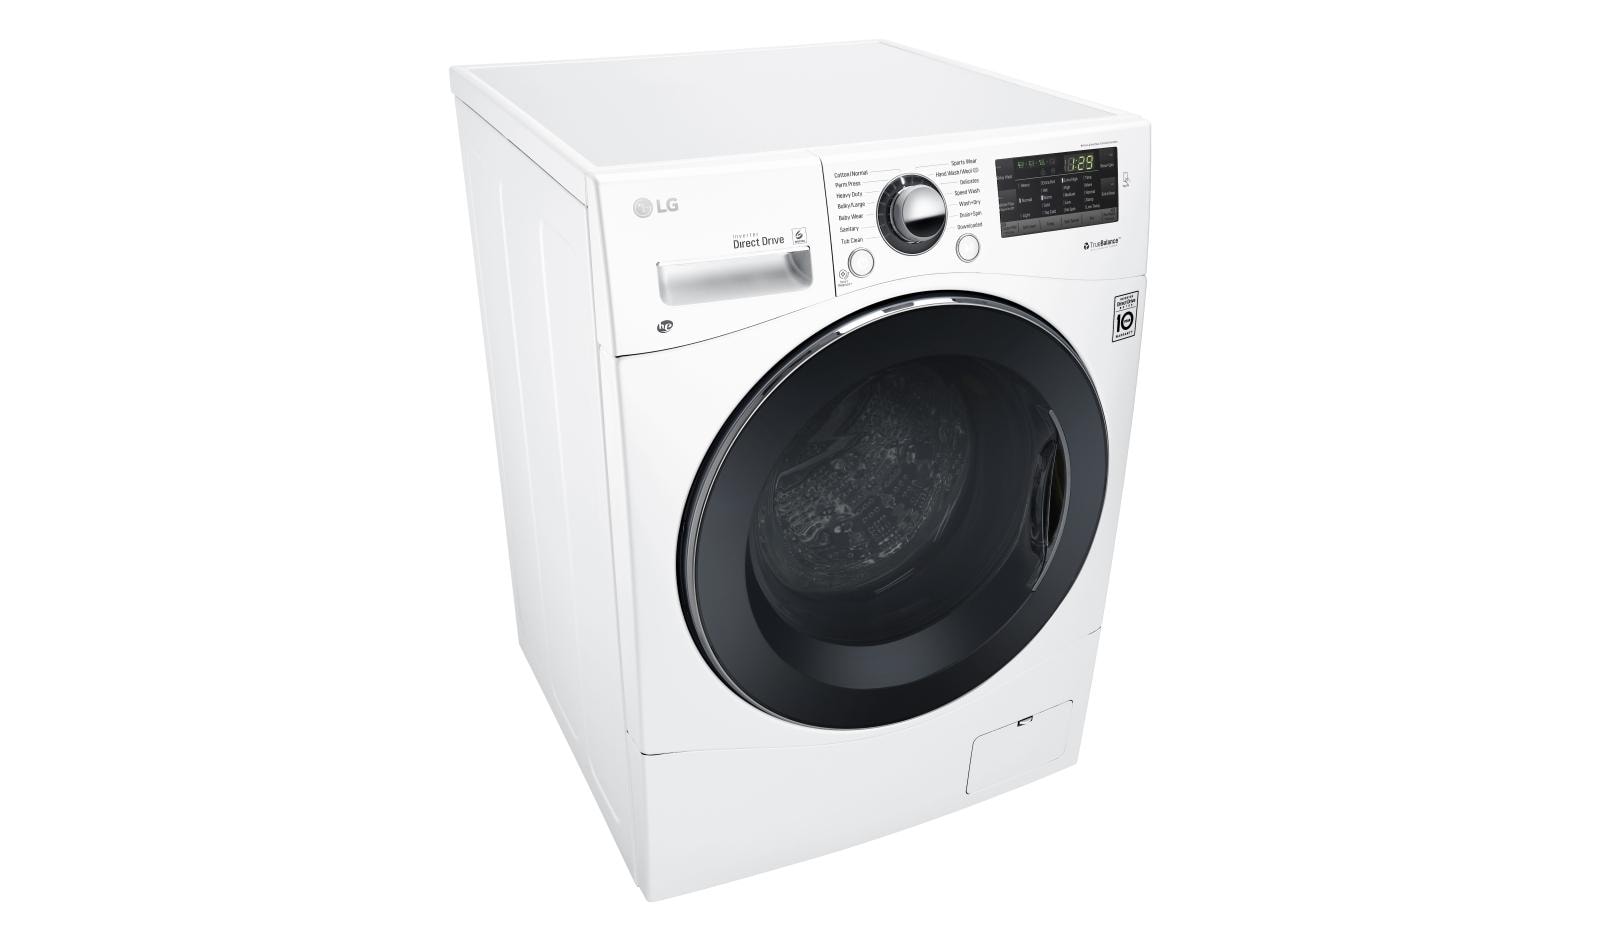 LG 2.3 cu.ft. Compact All-In-One Washer/Dryer (WM3488HW) | LG USA Best Buy All In One Washer Dryer